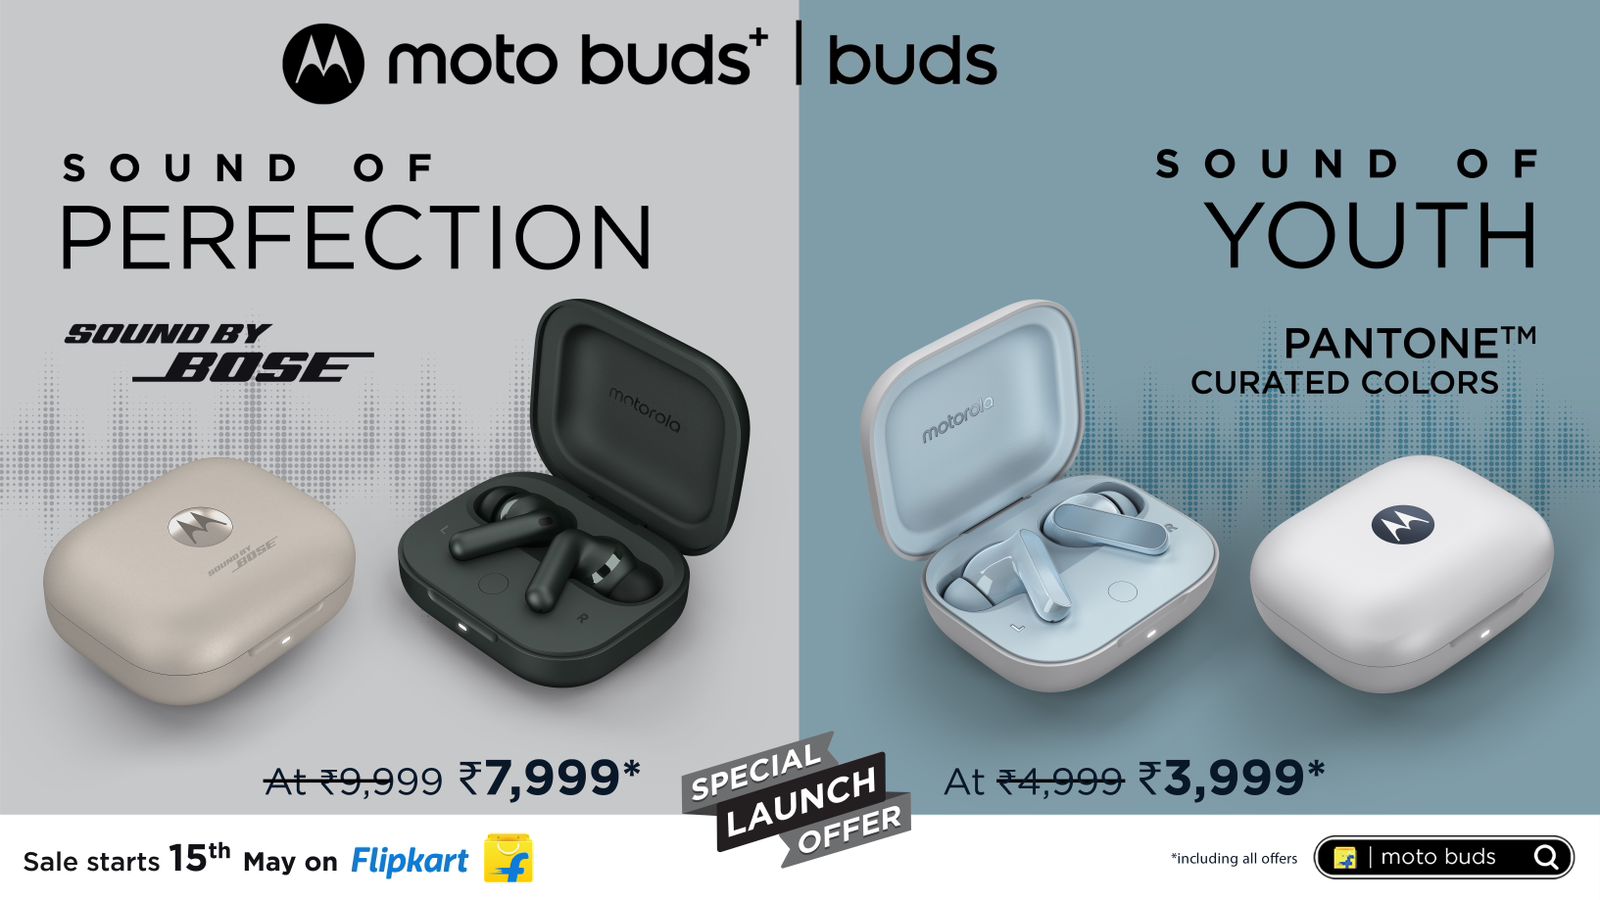 Motorola today announced the launch of the moto buds and moto buds+ in India